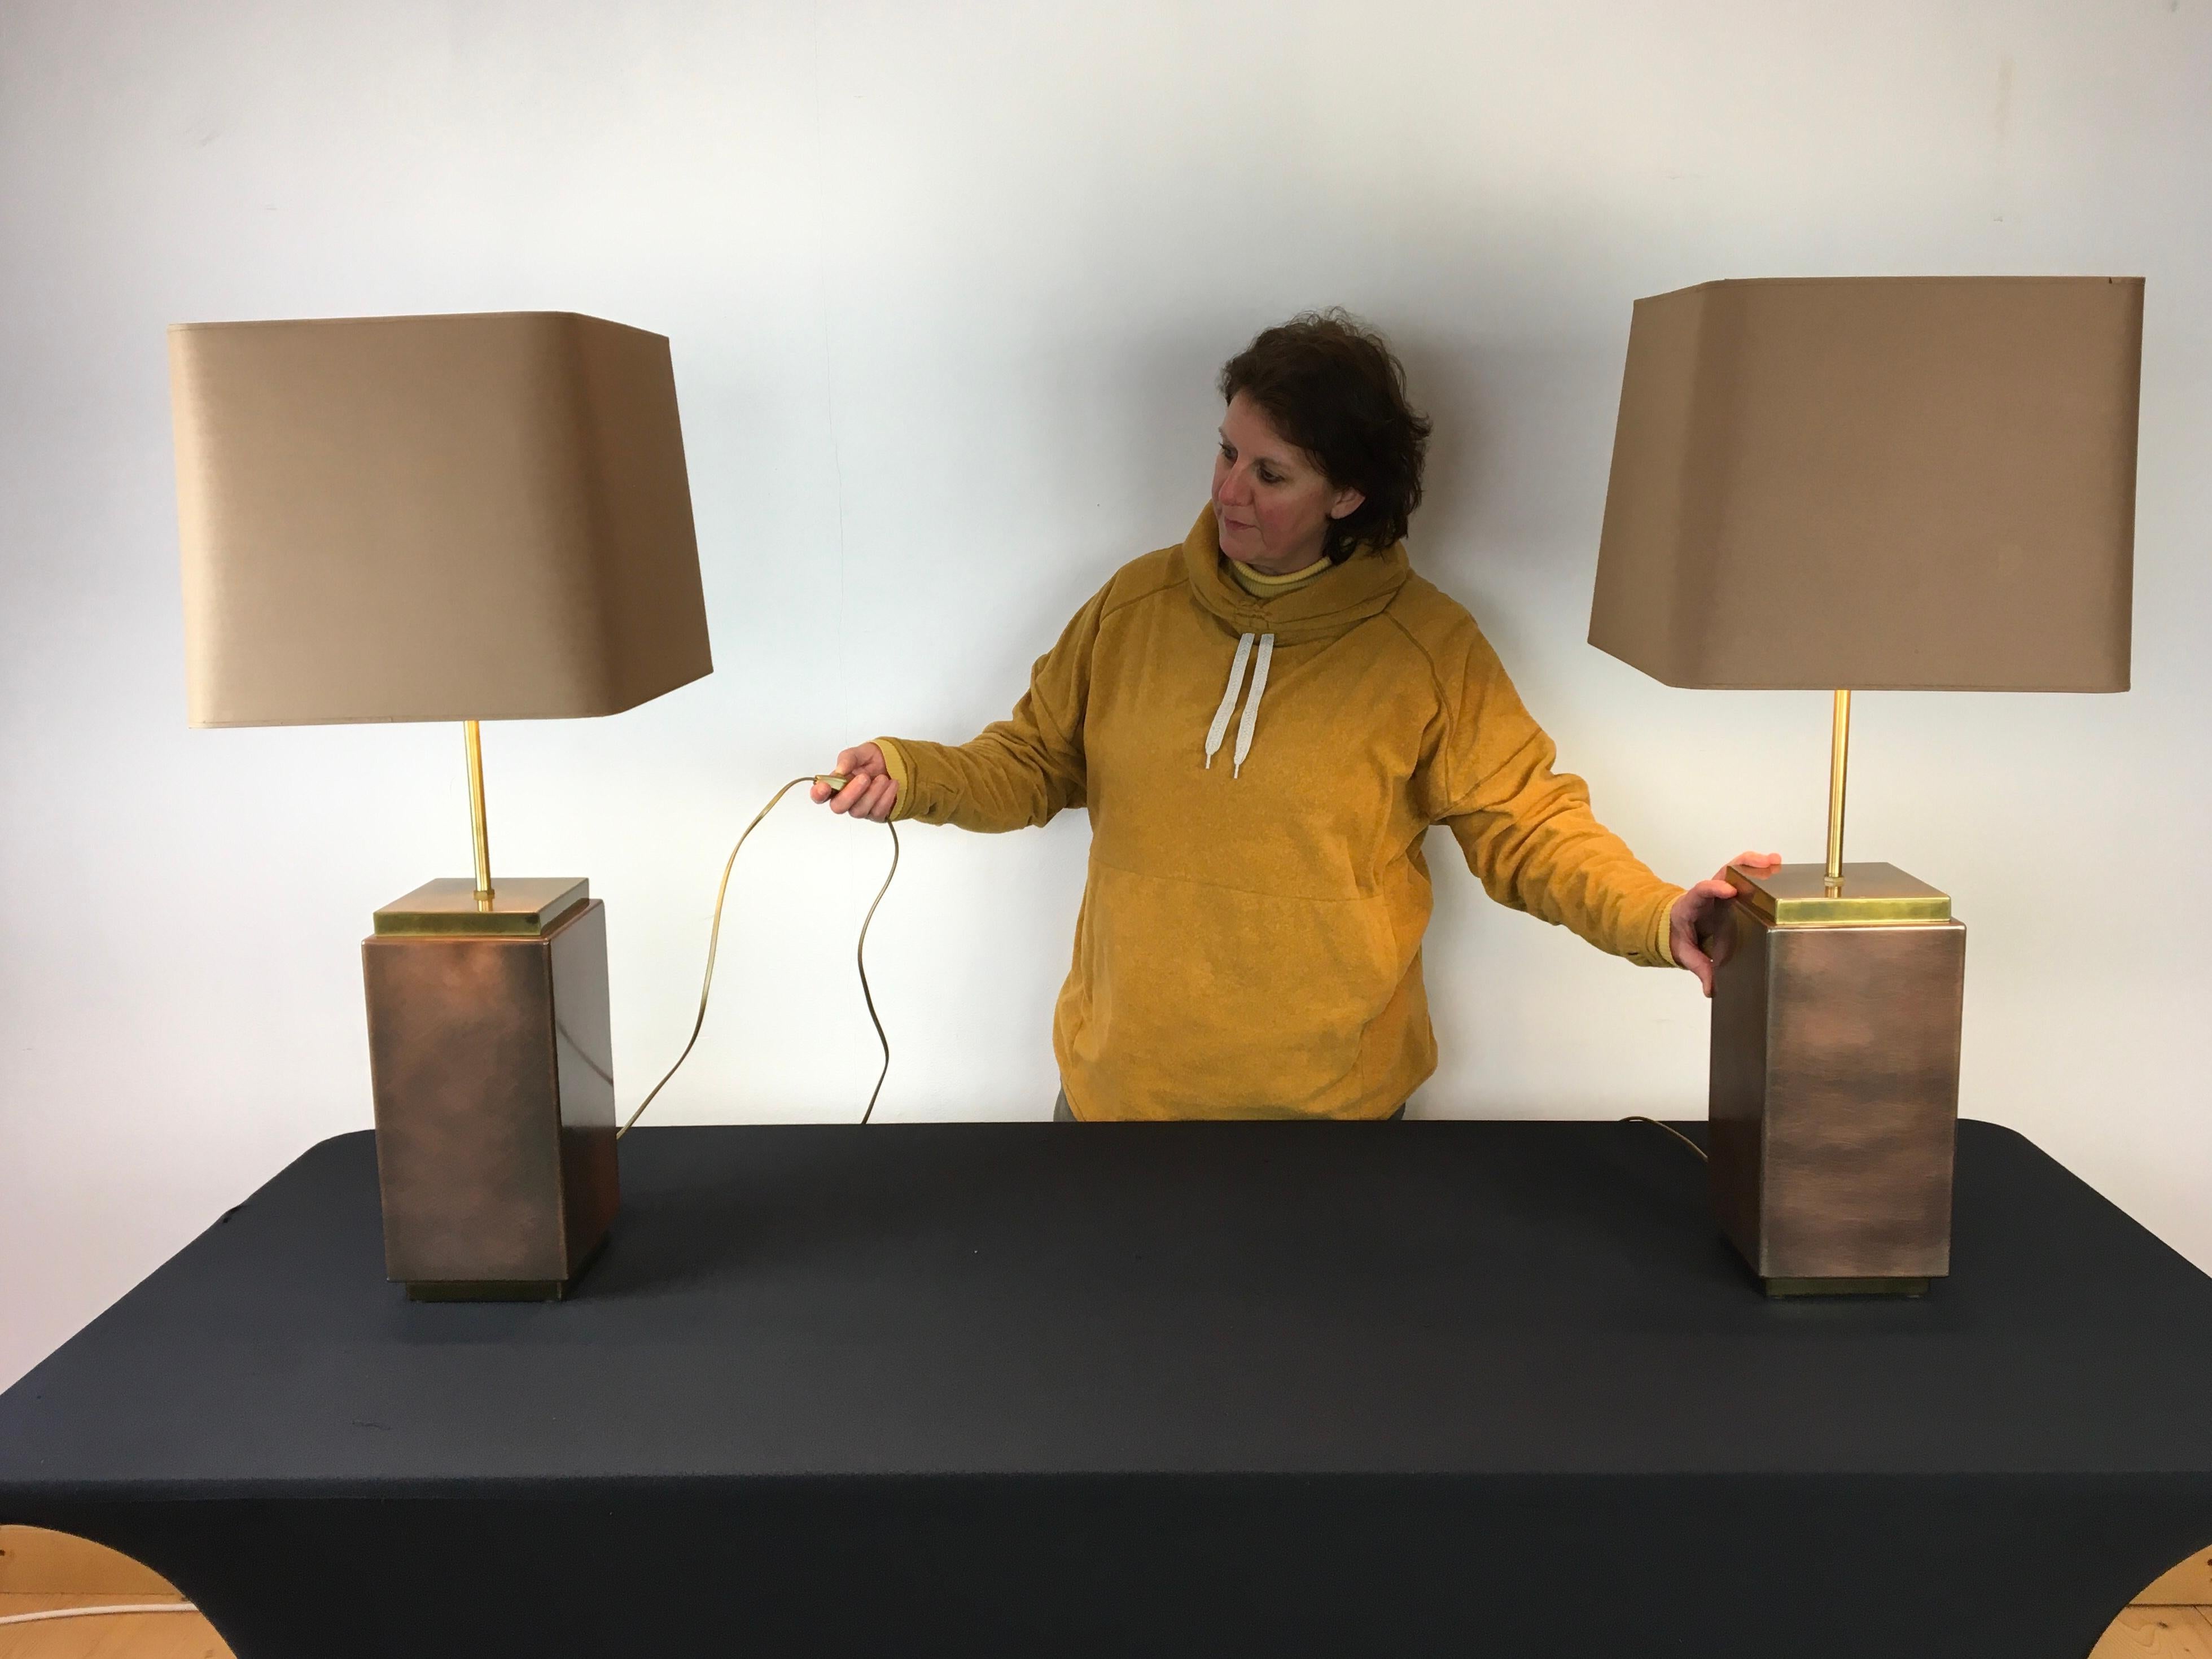 Pair of Belgo Chrome table lights. 
2 rectangular shaped table lamps made from copper and brass. 
Each table lamp has 2 light points for large fitting. 
The height of the table light base can be adjusted higher and lower depending on the size of